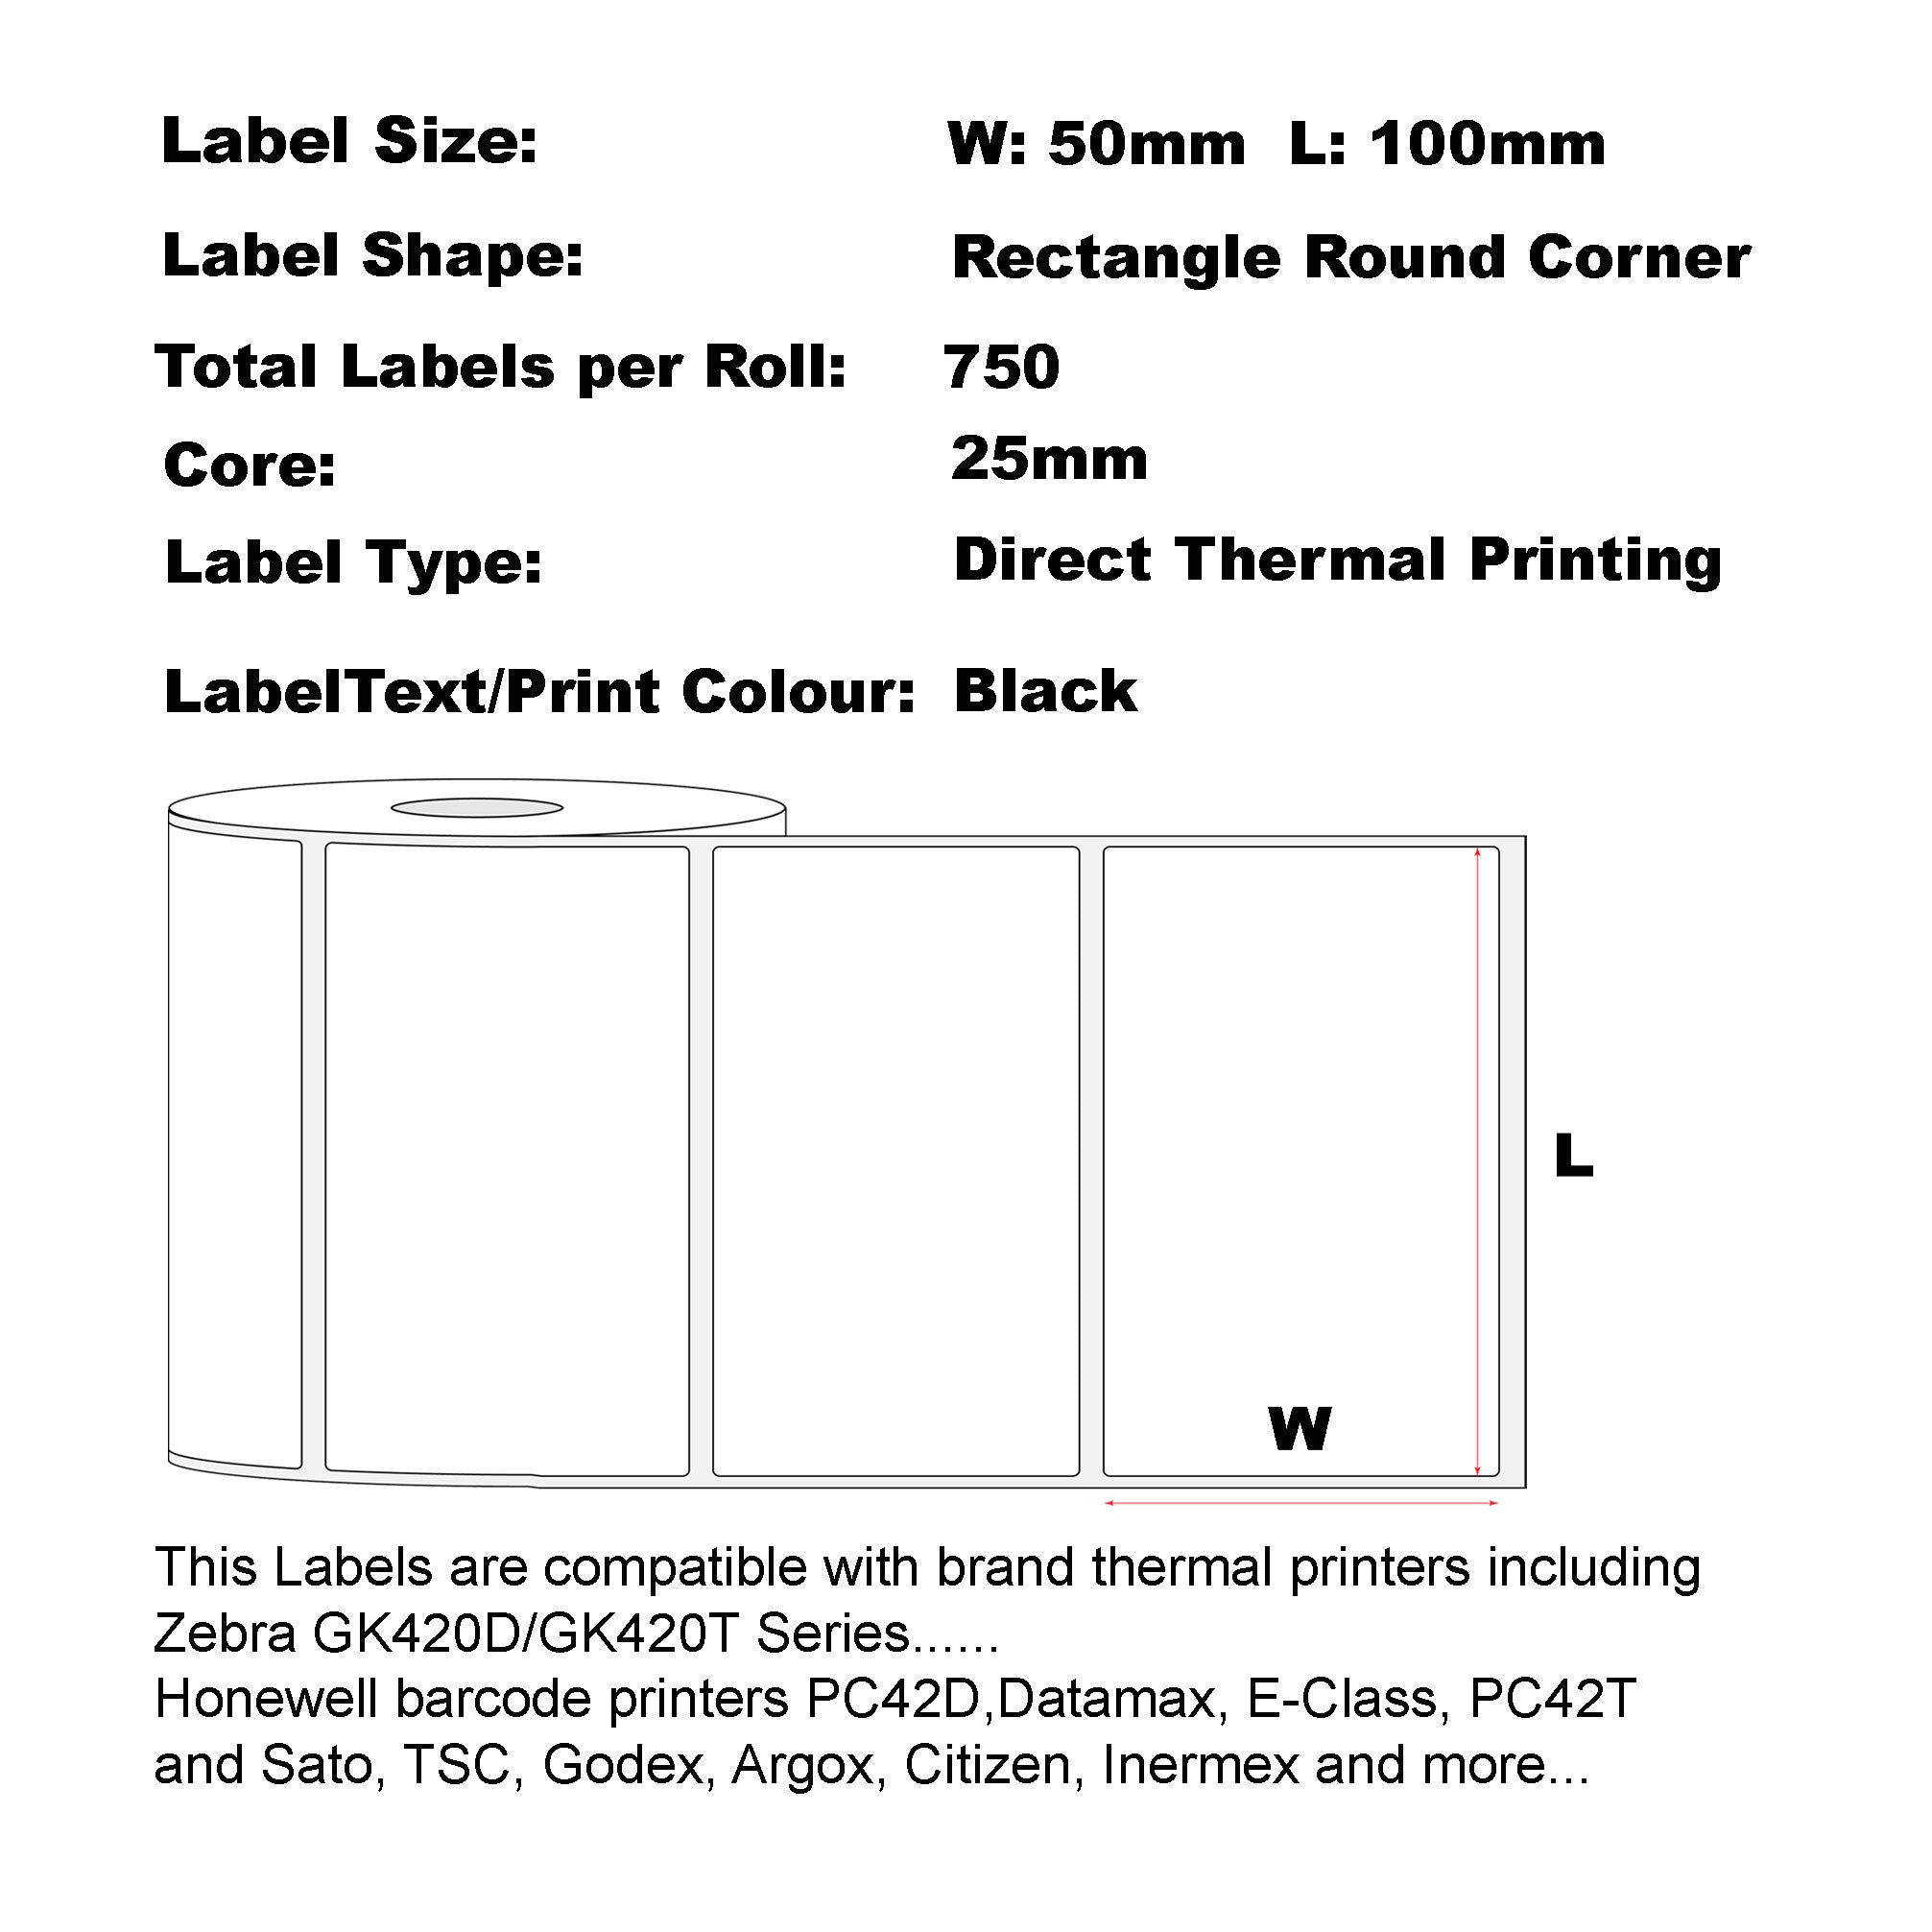 Direct Thermal Labels 100 x 50mm (4"x2") 750 Perforated Labels Per Roll (Zebra)/ 50 Rolls